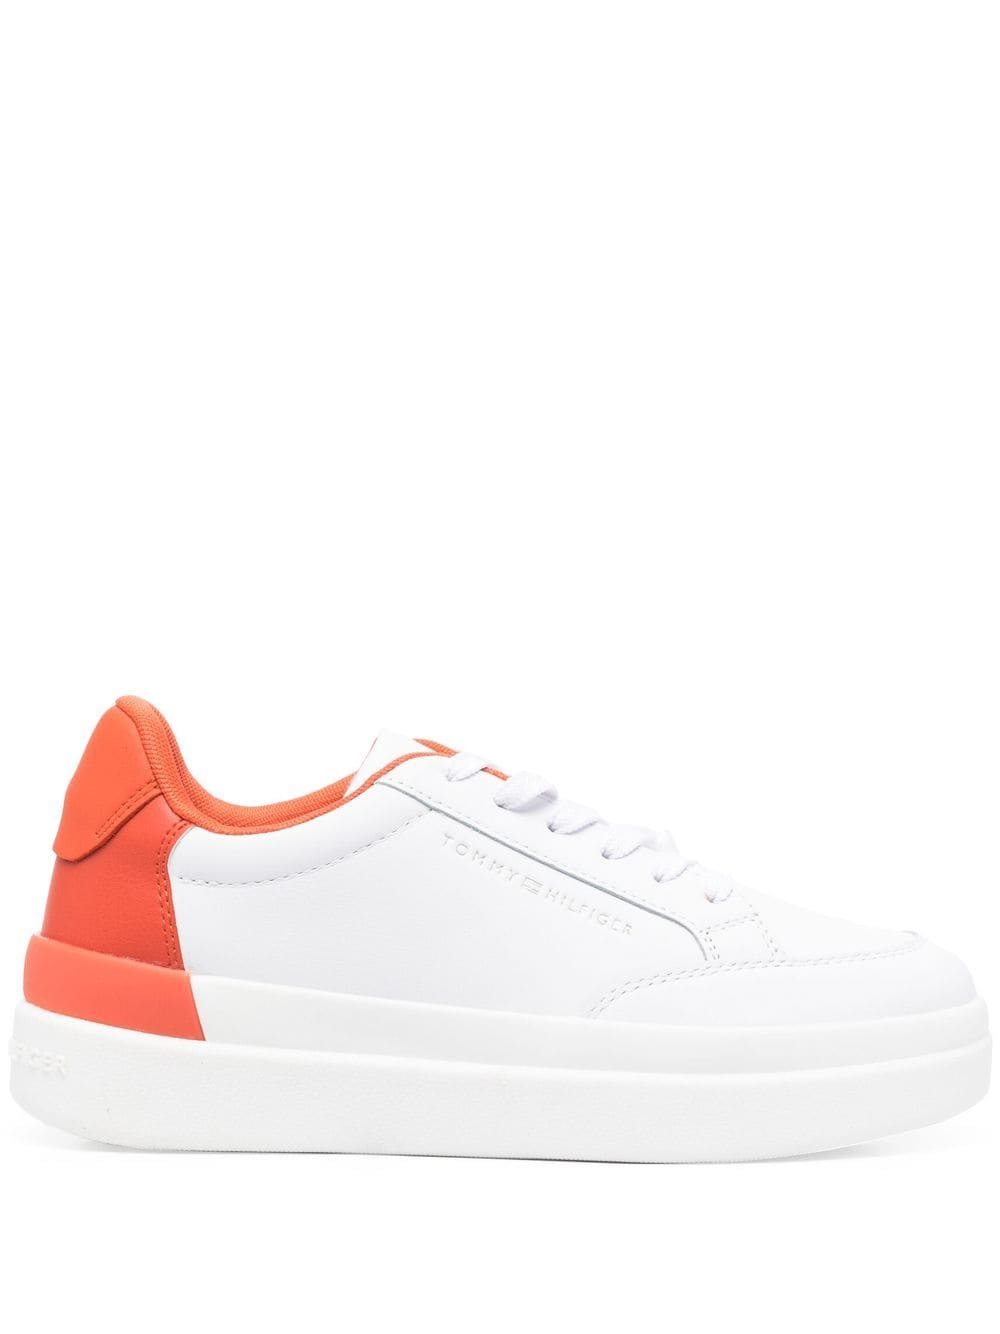 Tommy Hilfiger Two-tone Platform Sneakers In White